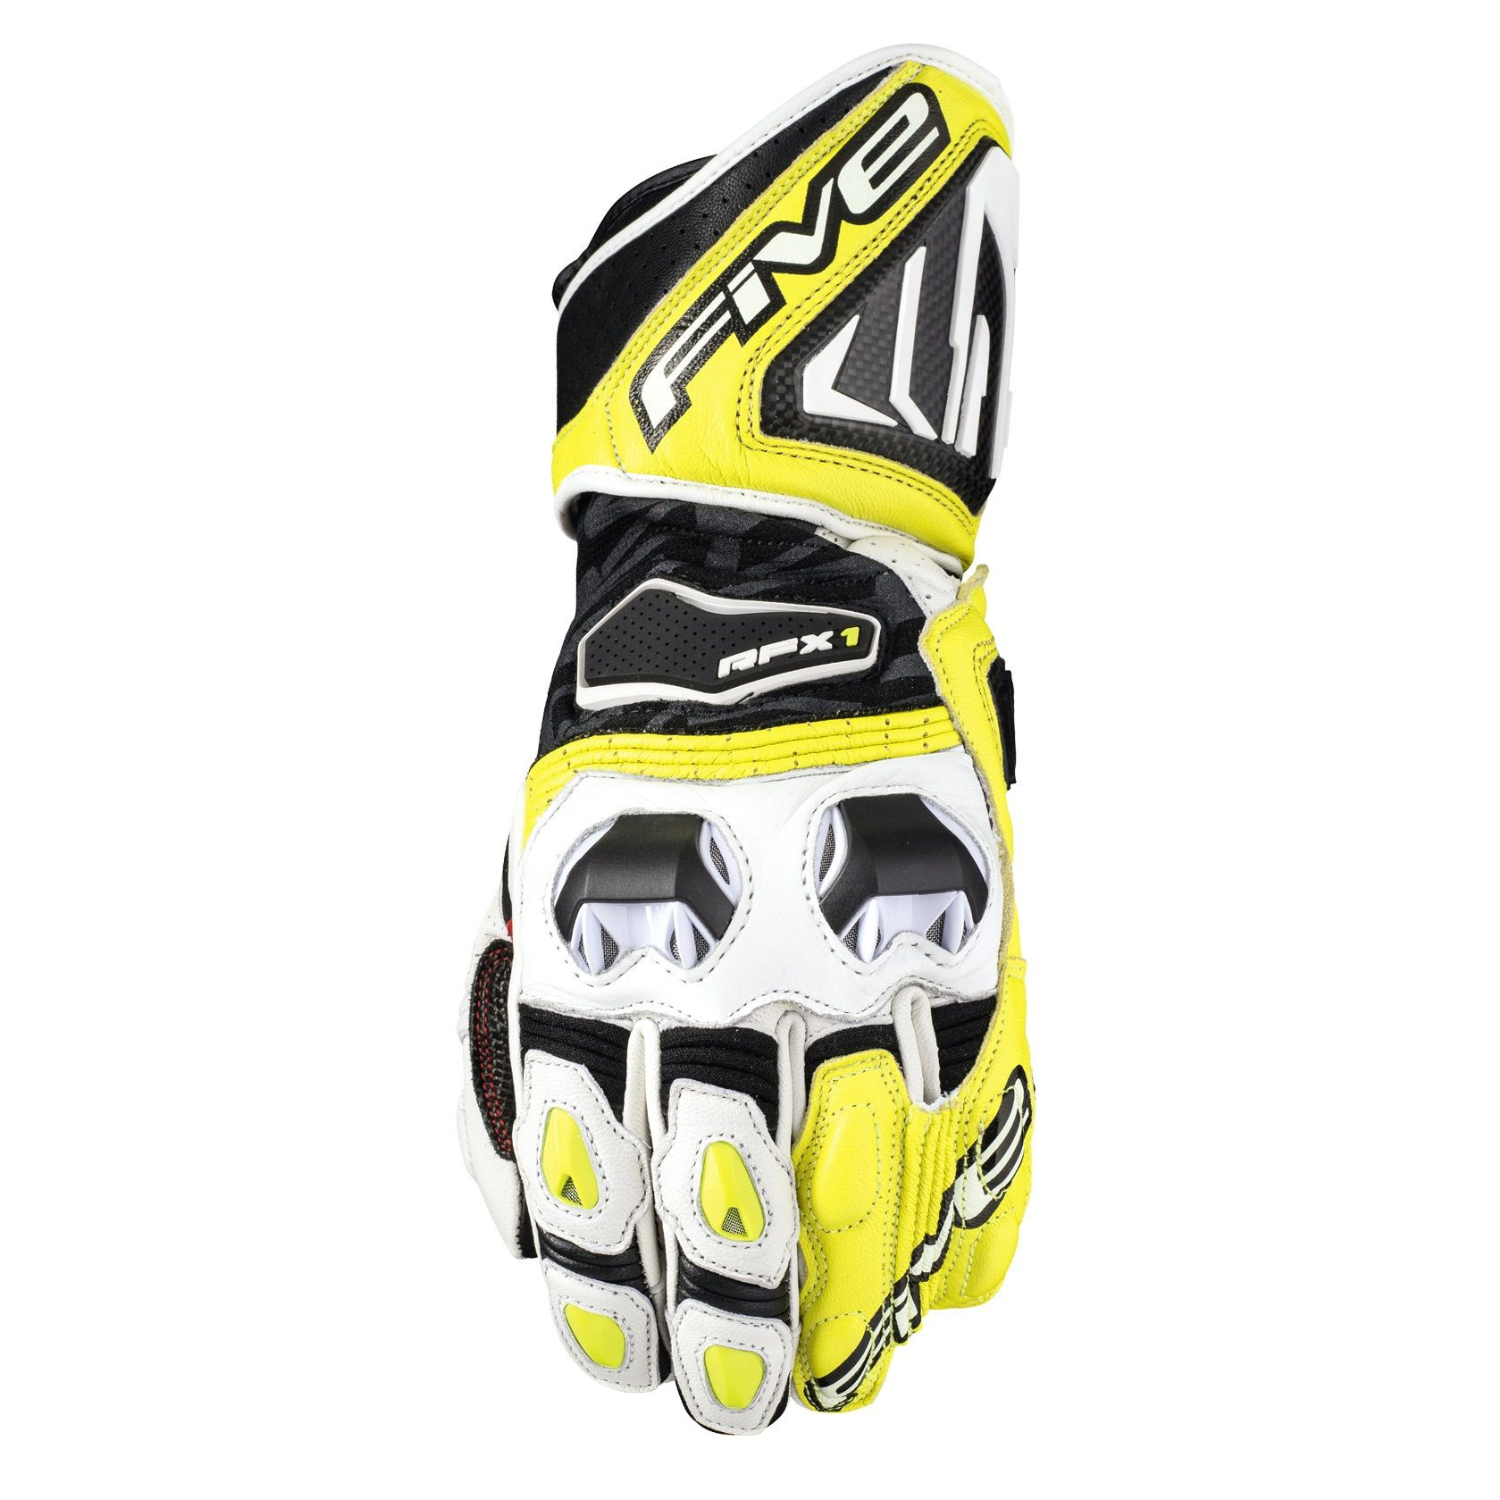 Image of Five RFX1 Gloves White Yellow Taille XL